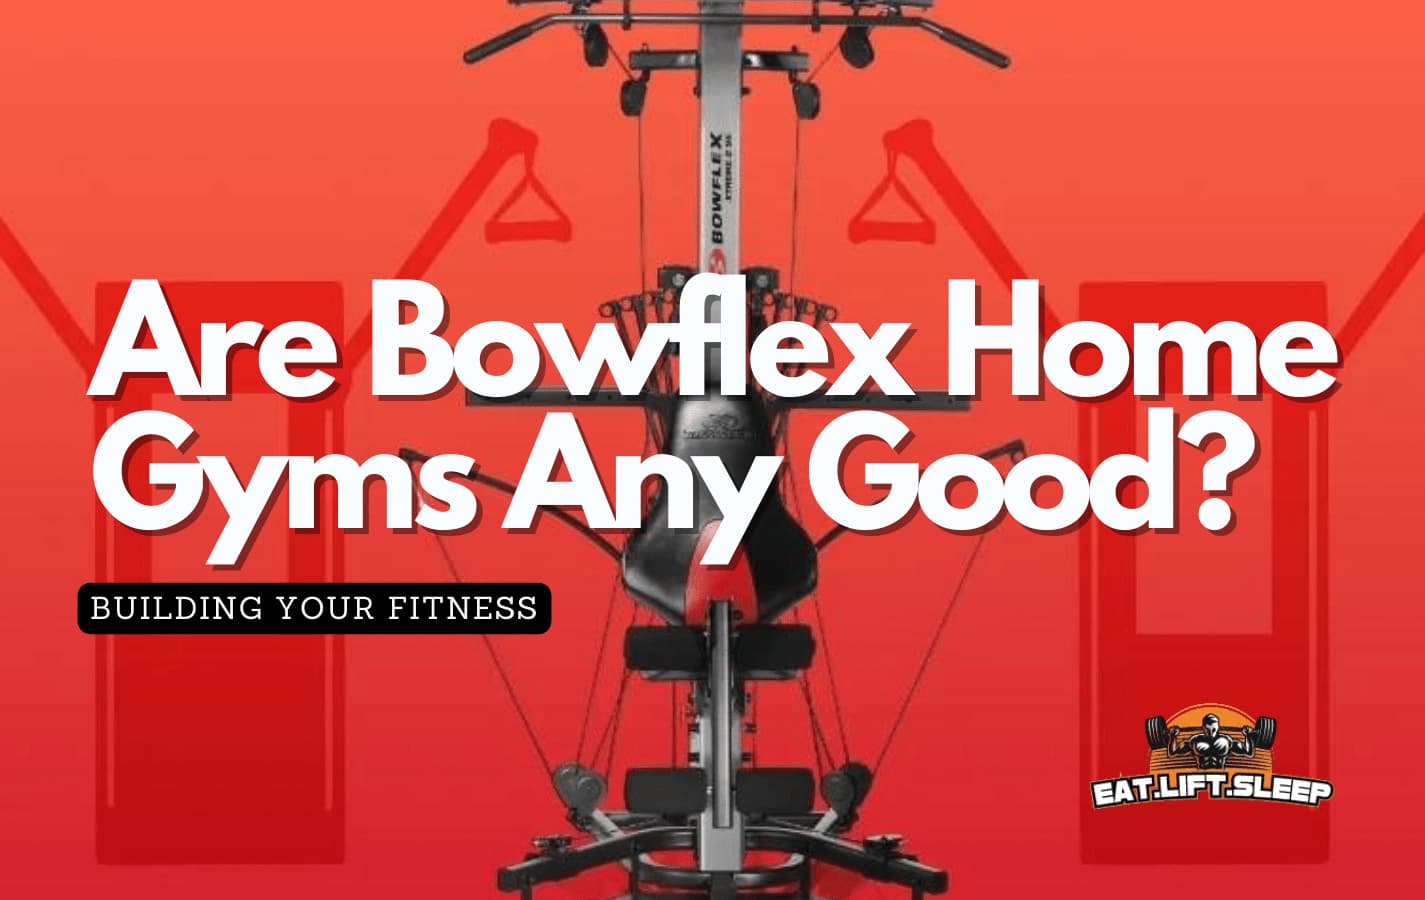 Bowflex hom gym standing isolated on a red background